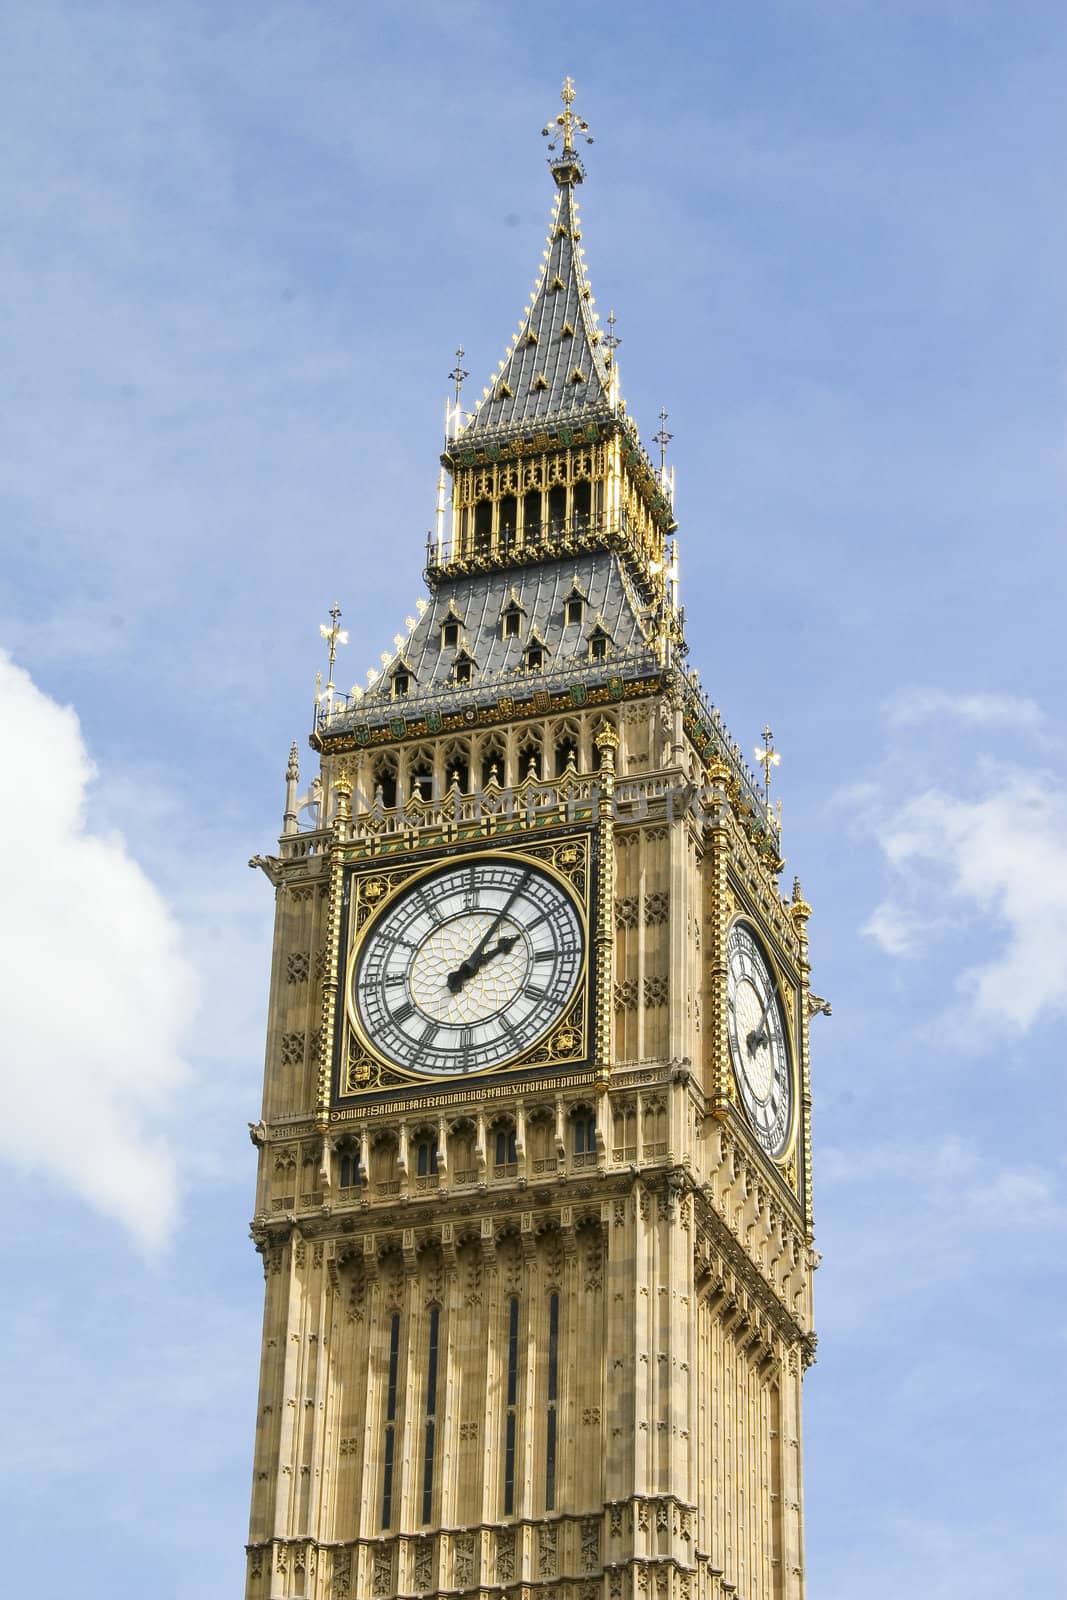 A picture of Big Ben in London.